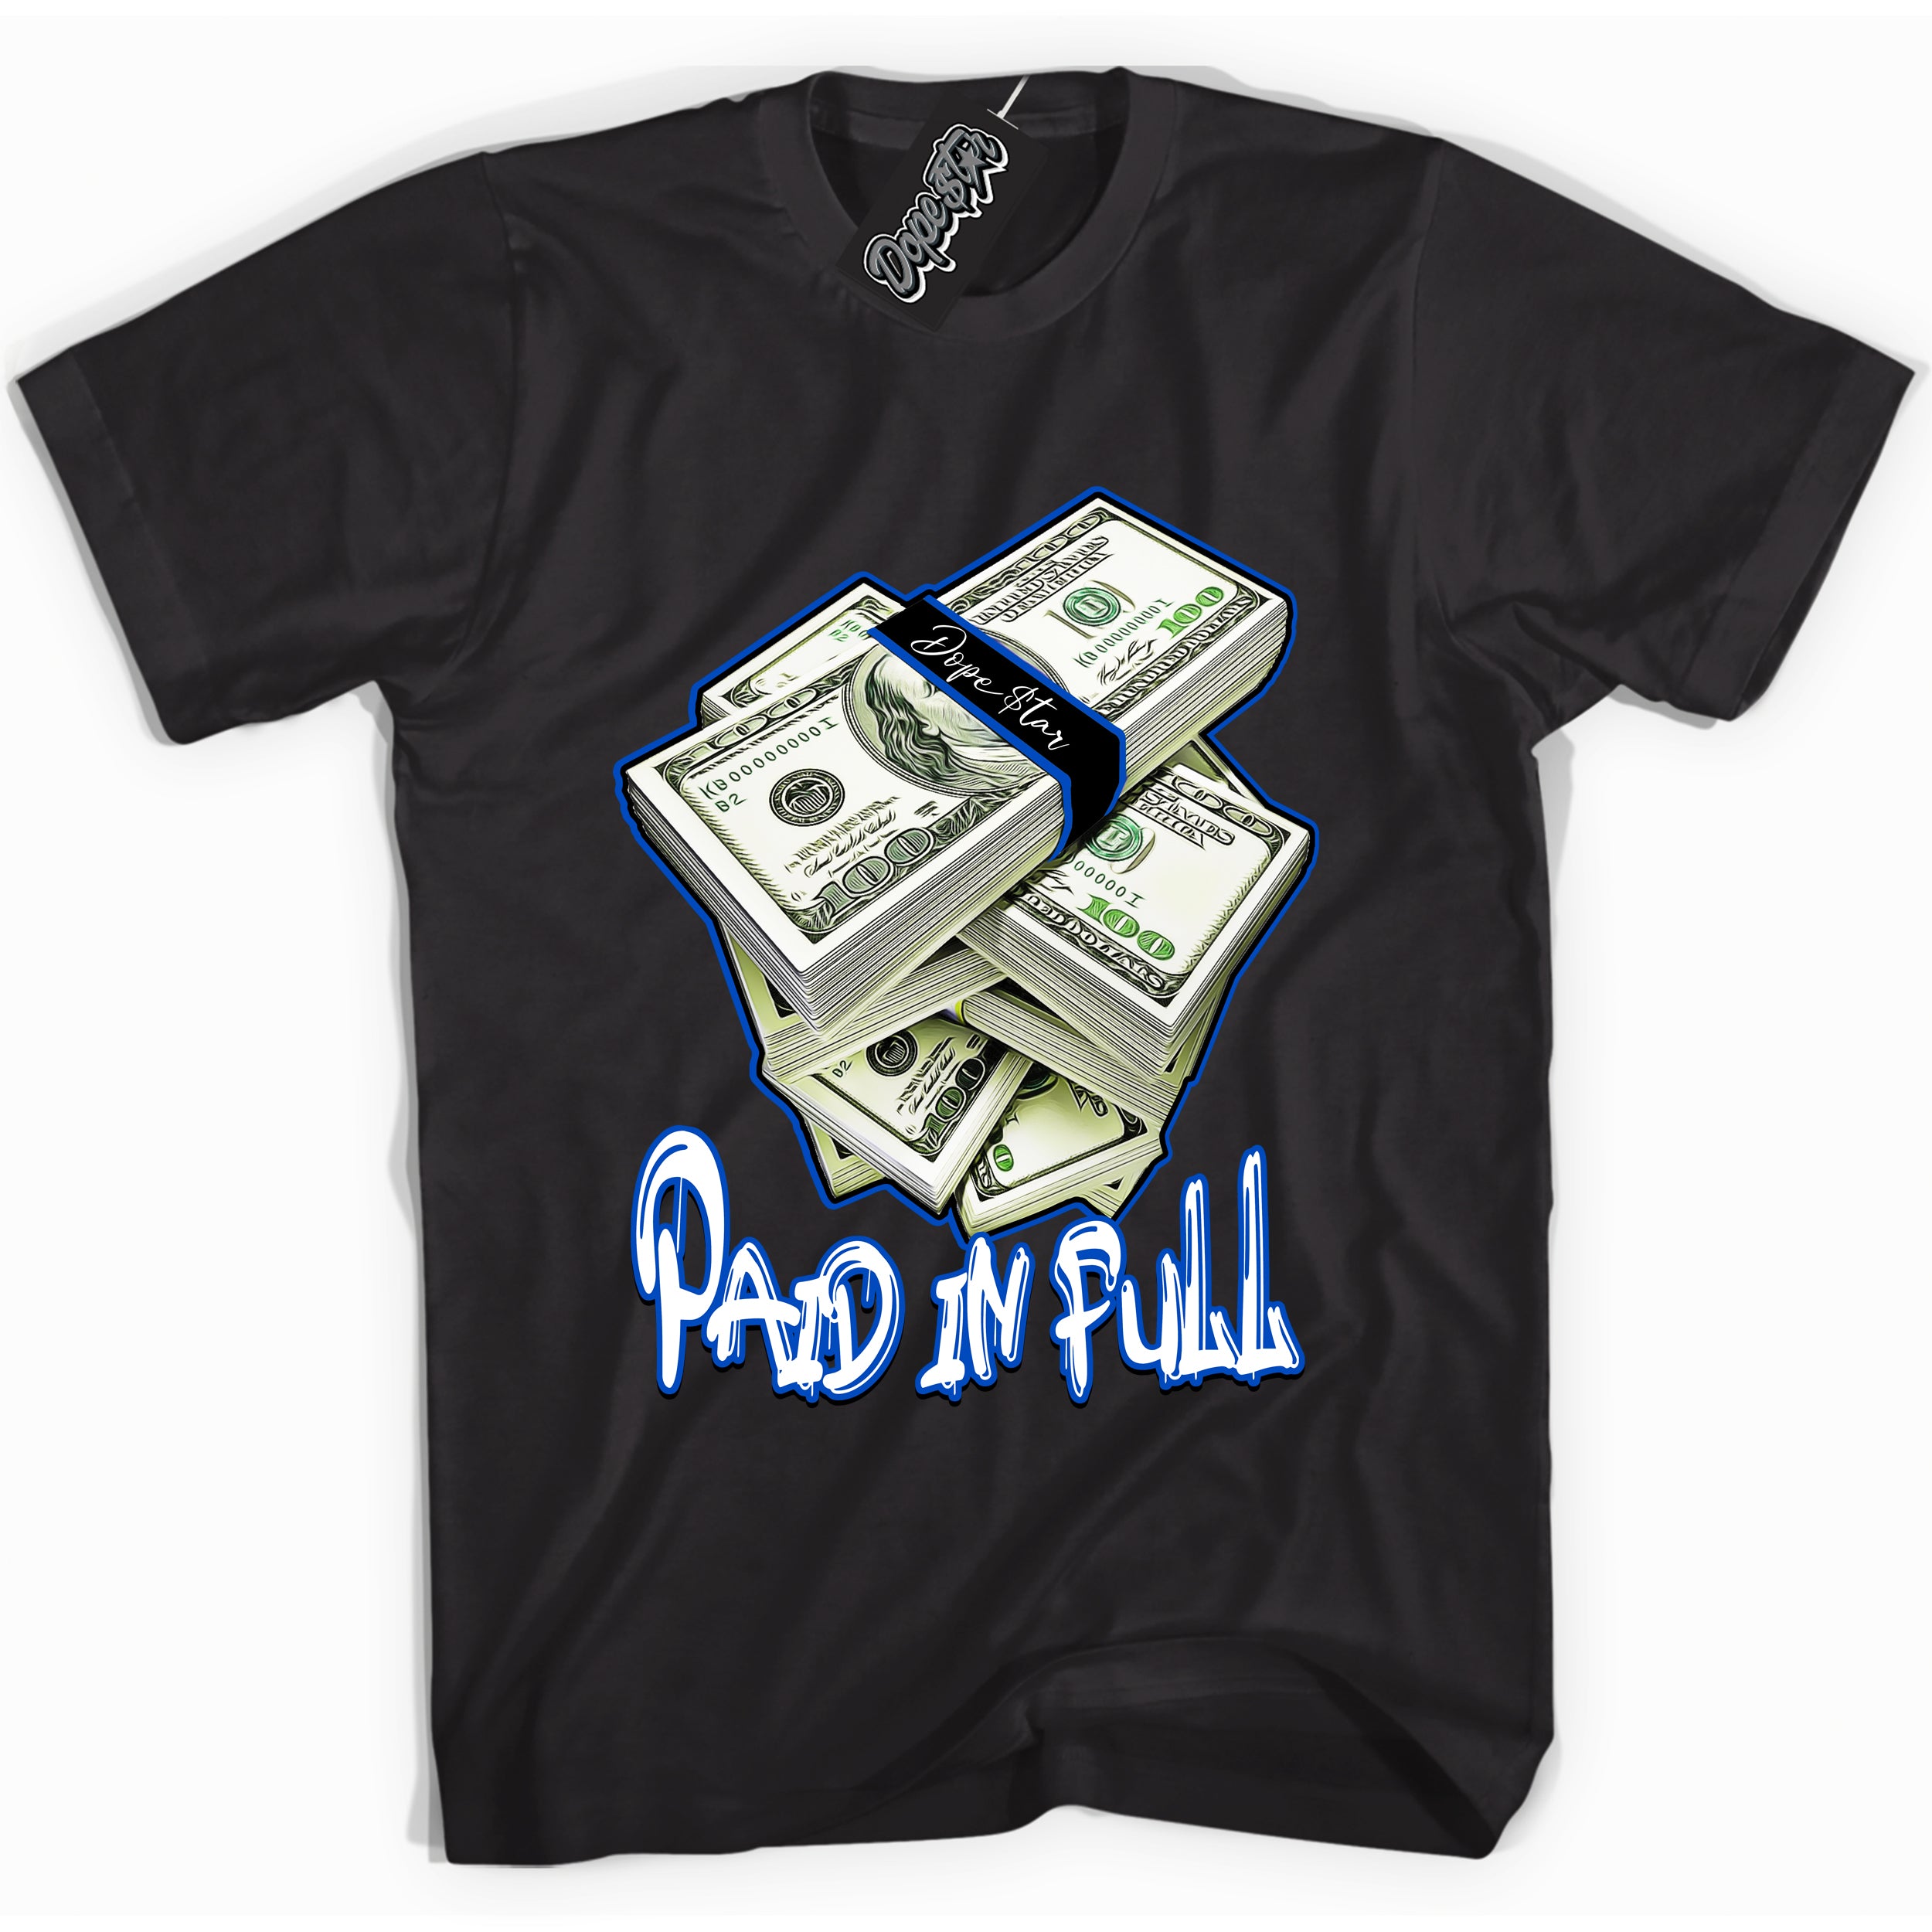 Cool Black graphic tee with Paid In Full print, that perfectly matches OG Royal Reimagined 1s sneakers 